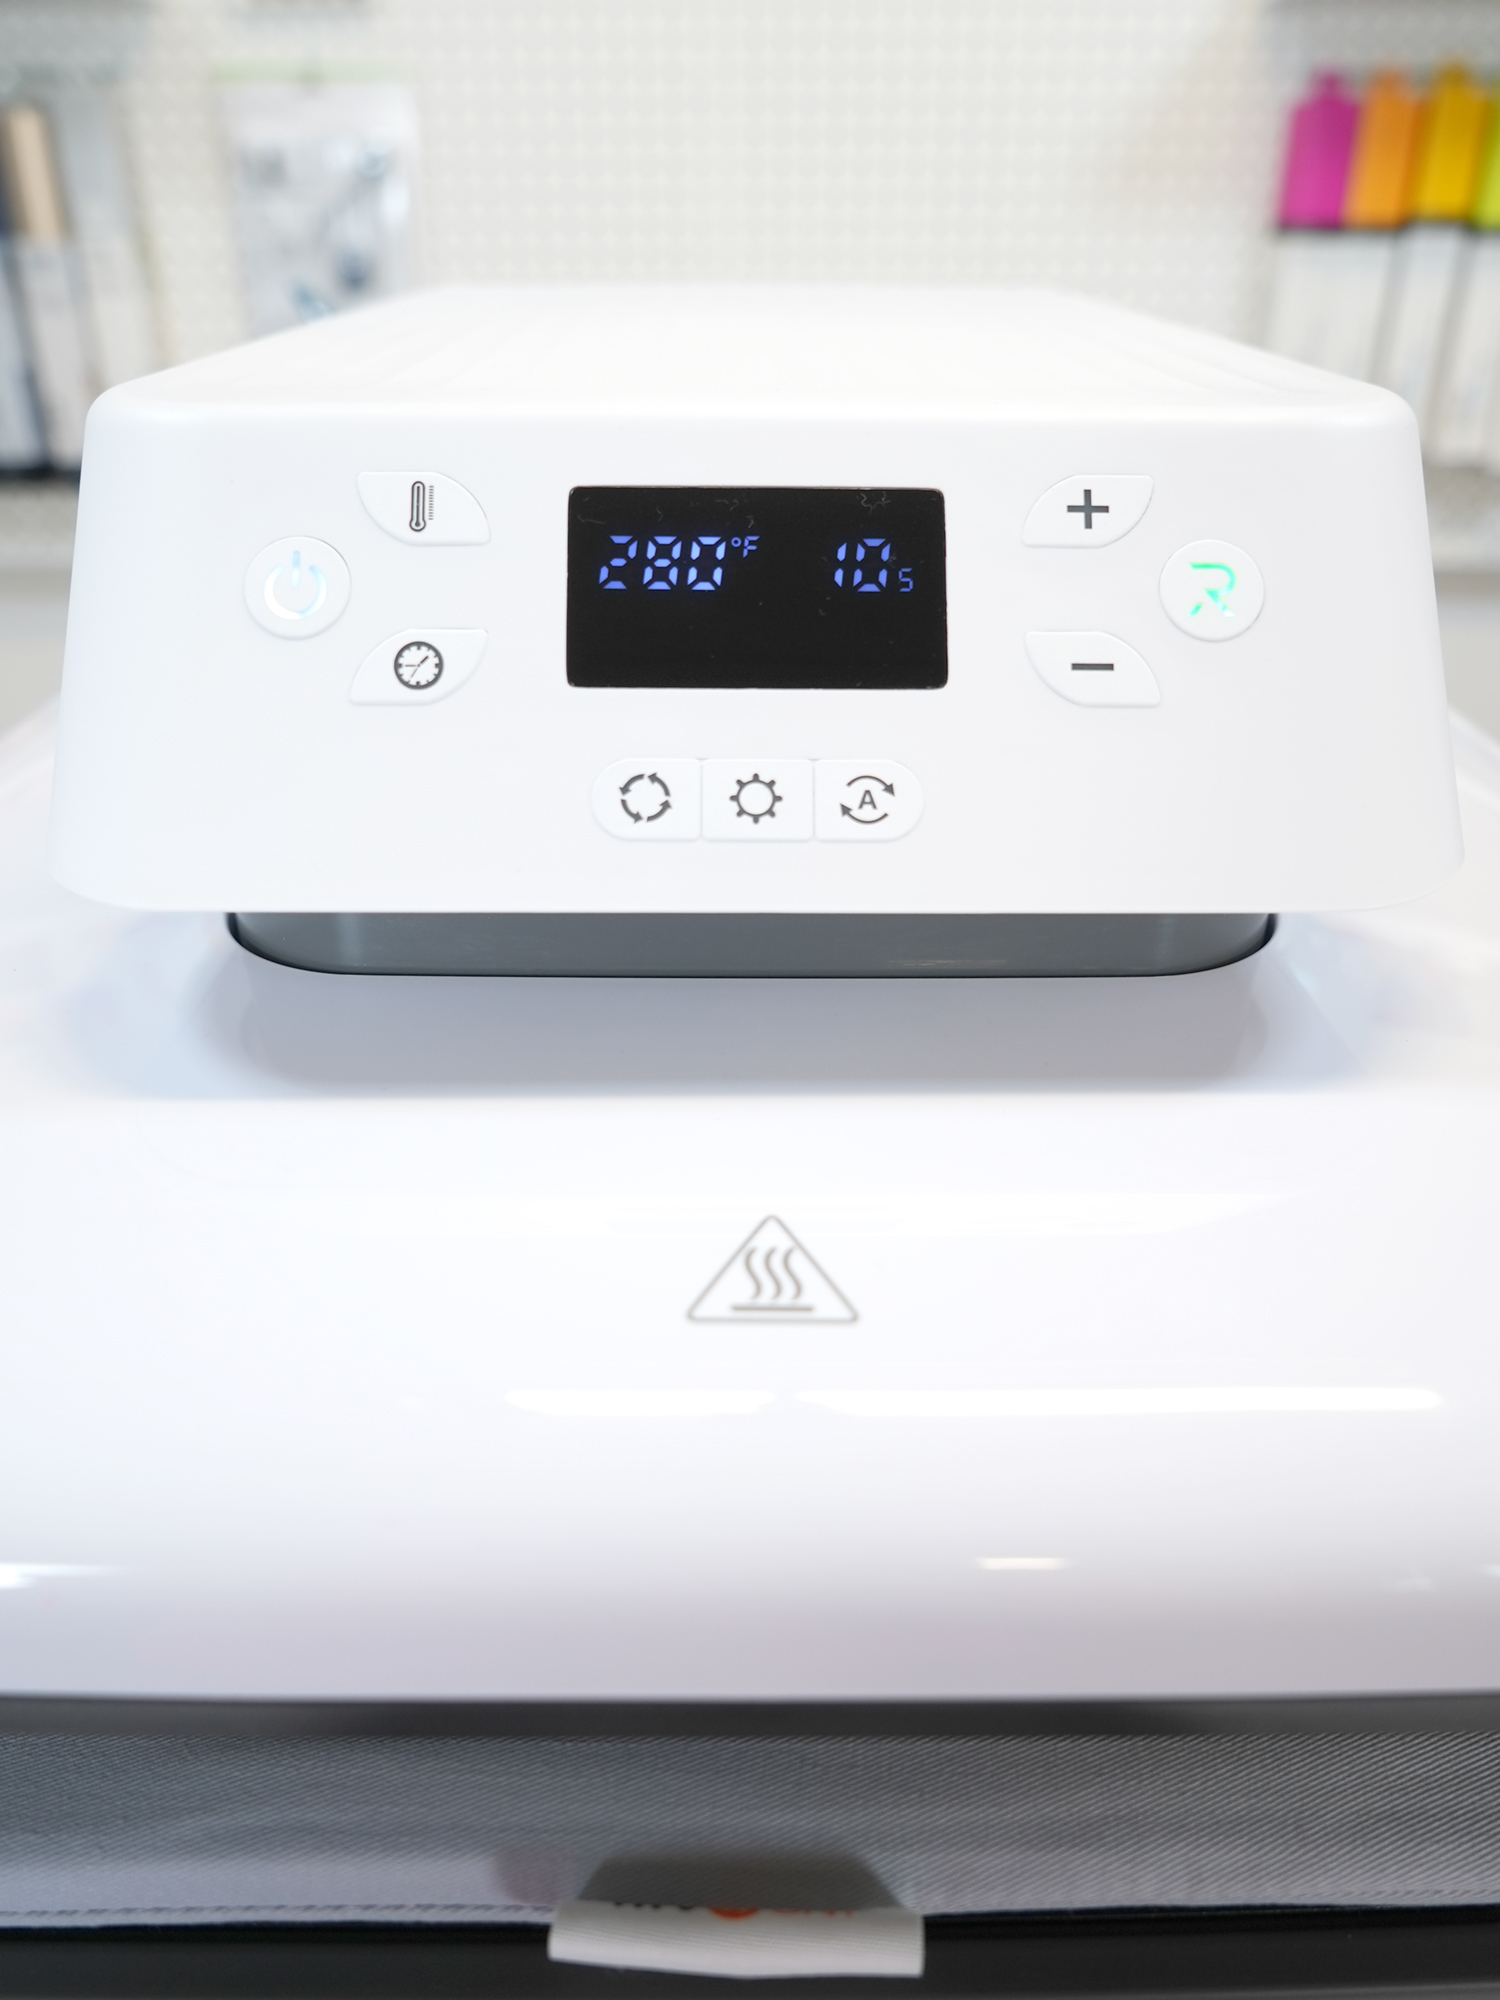 HTVRONT Auto Heat Press Review: Is It Worth the Investment? - The How-To  Home